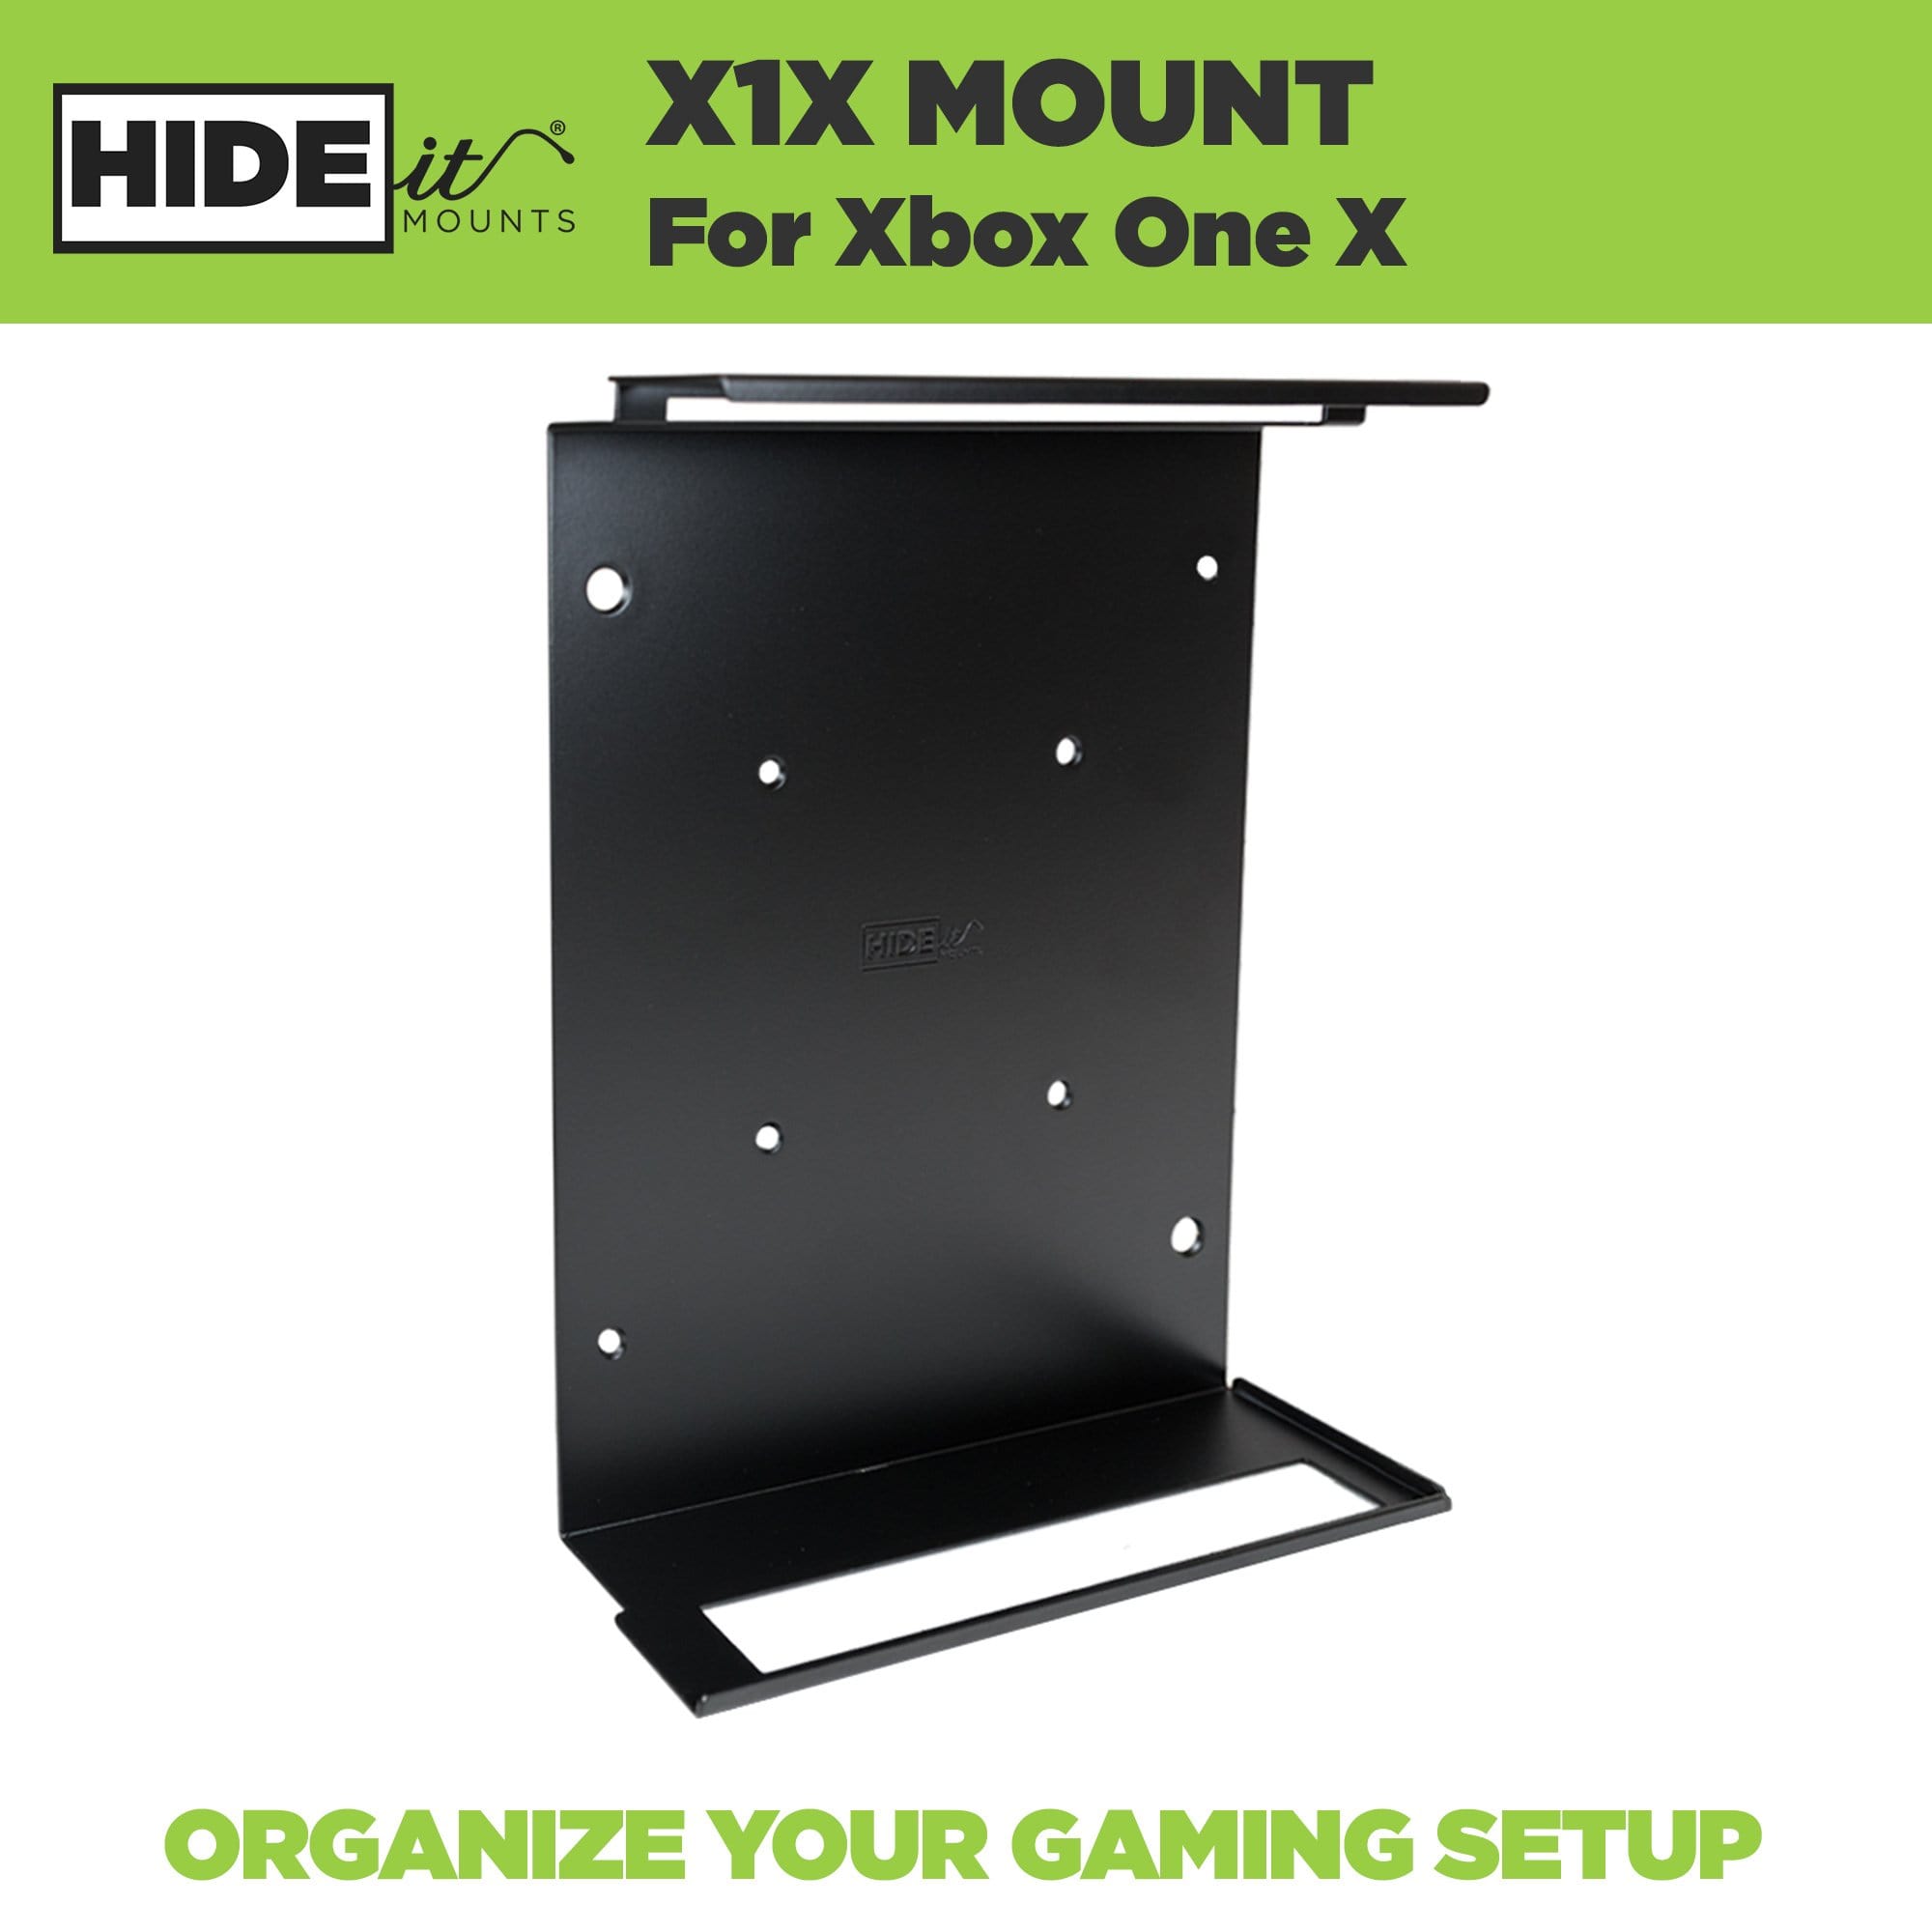 HIDEit mount for xbox one x made with countersunk holes for flush and easy installation.